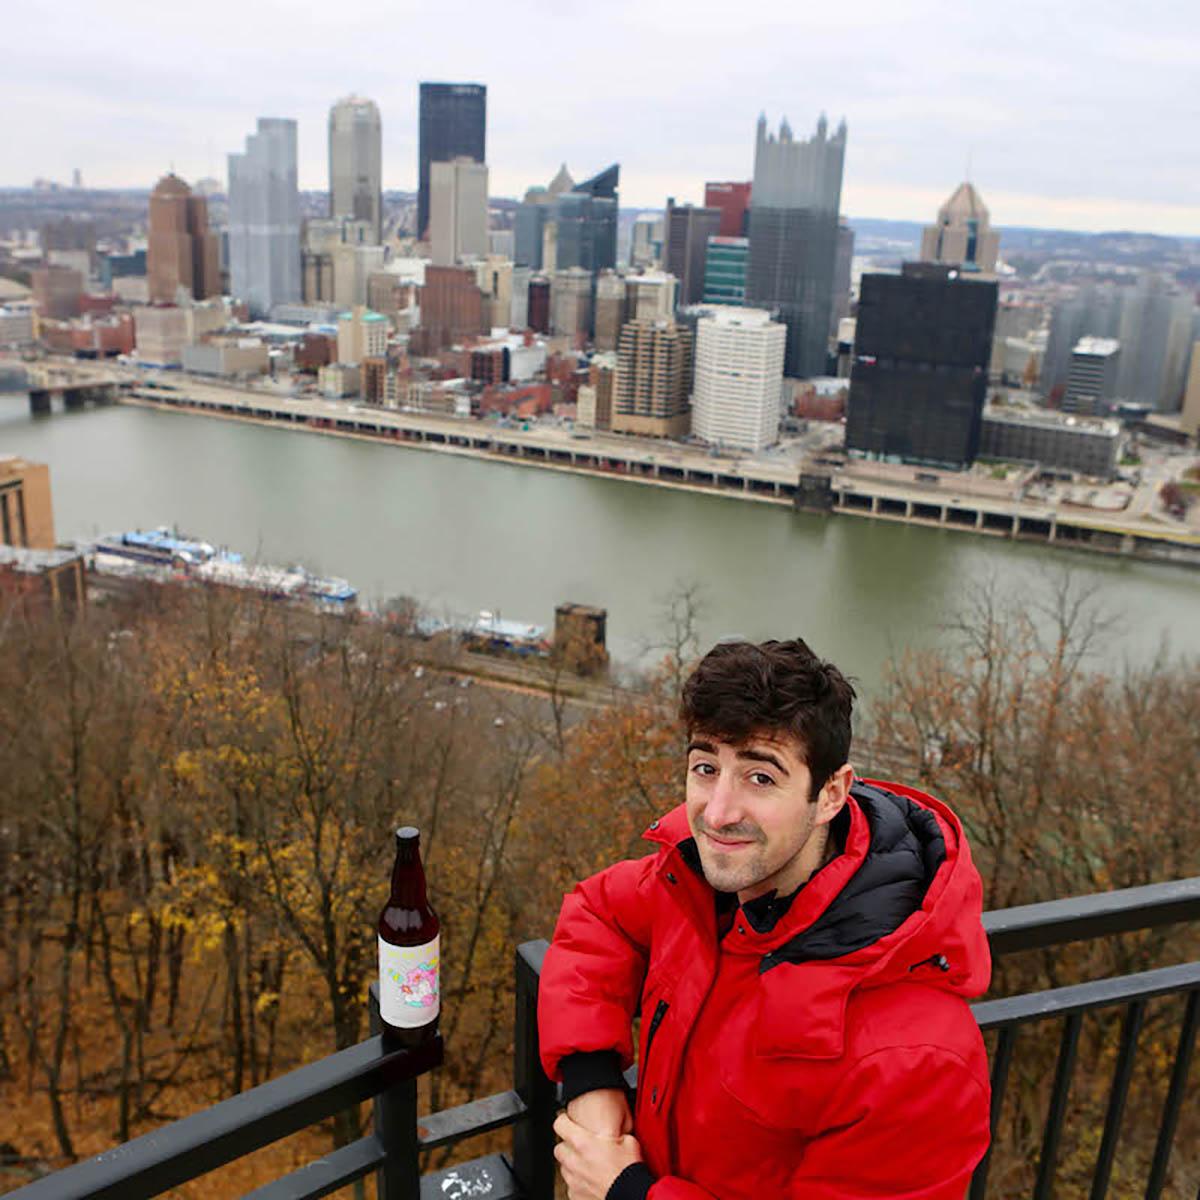 Photo of a young man in a red jacket posing with a beer bottle in front of the Pittsburgh skyline